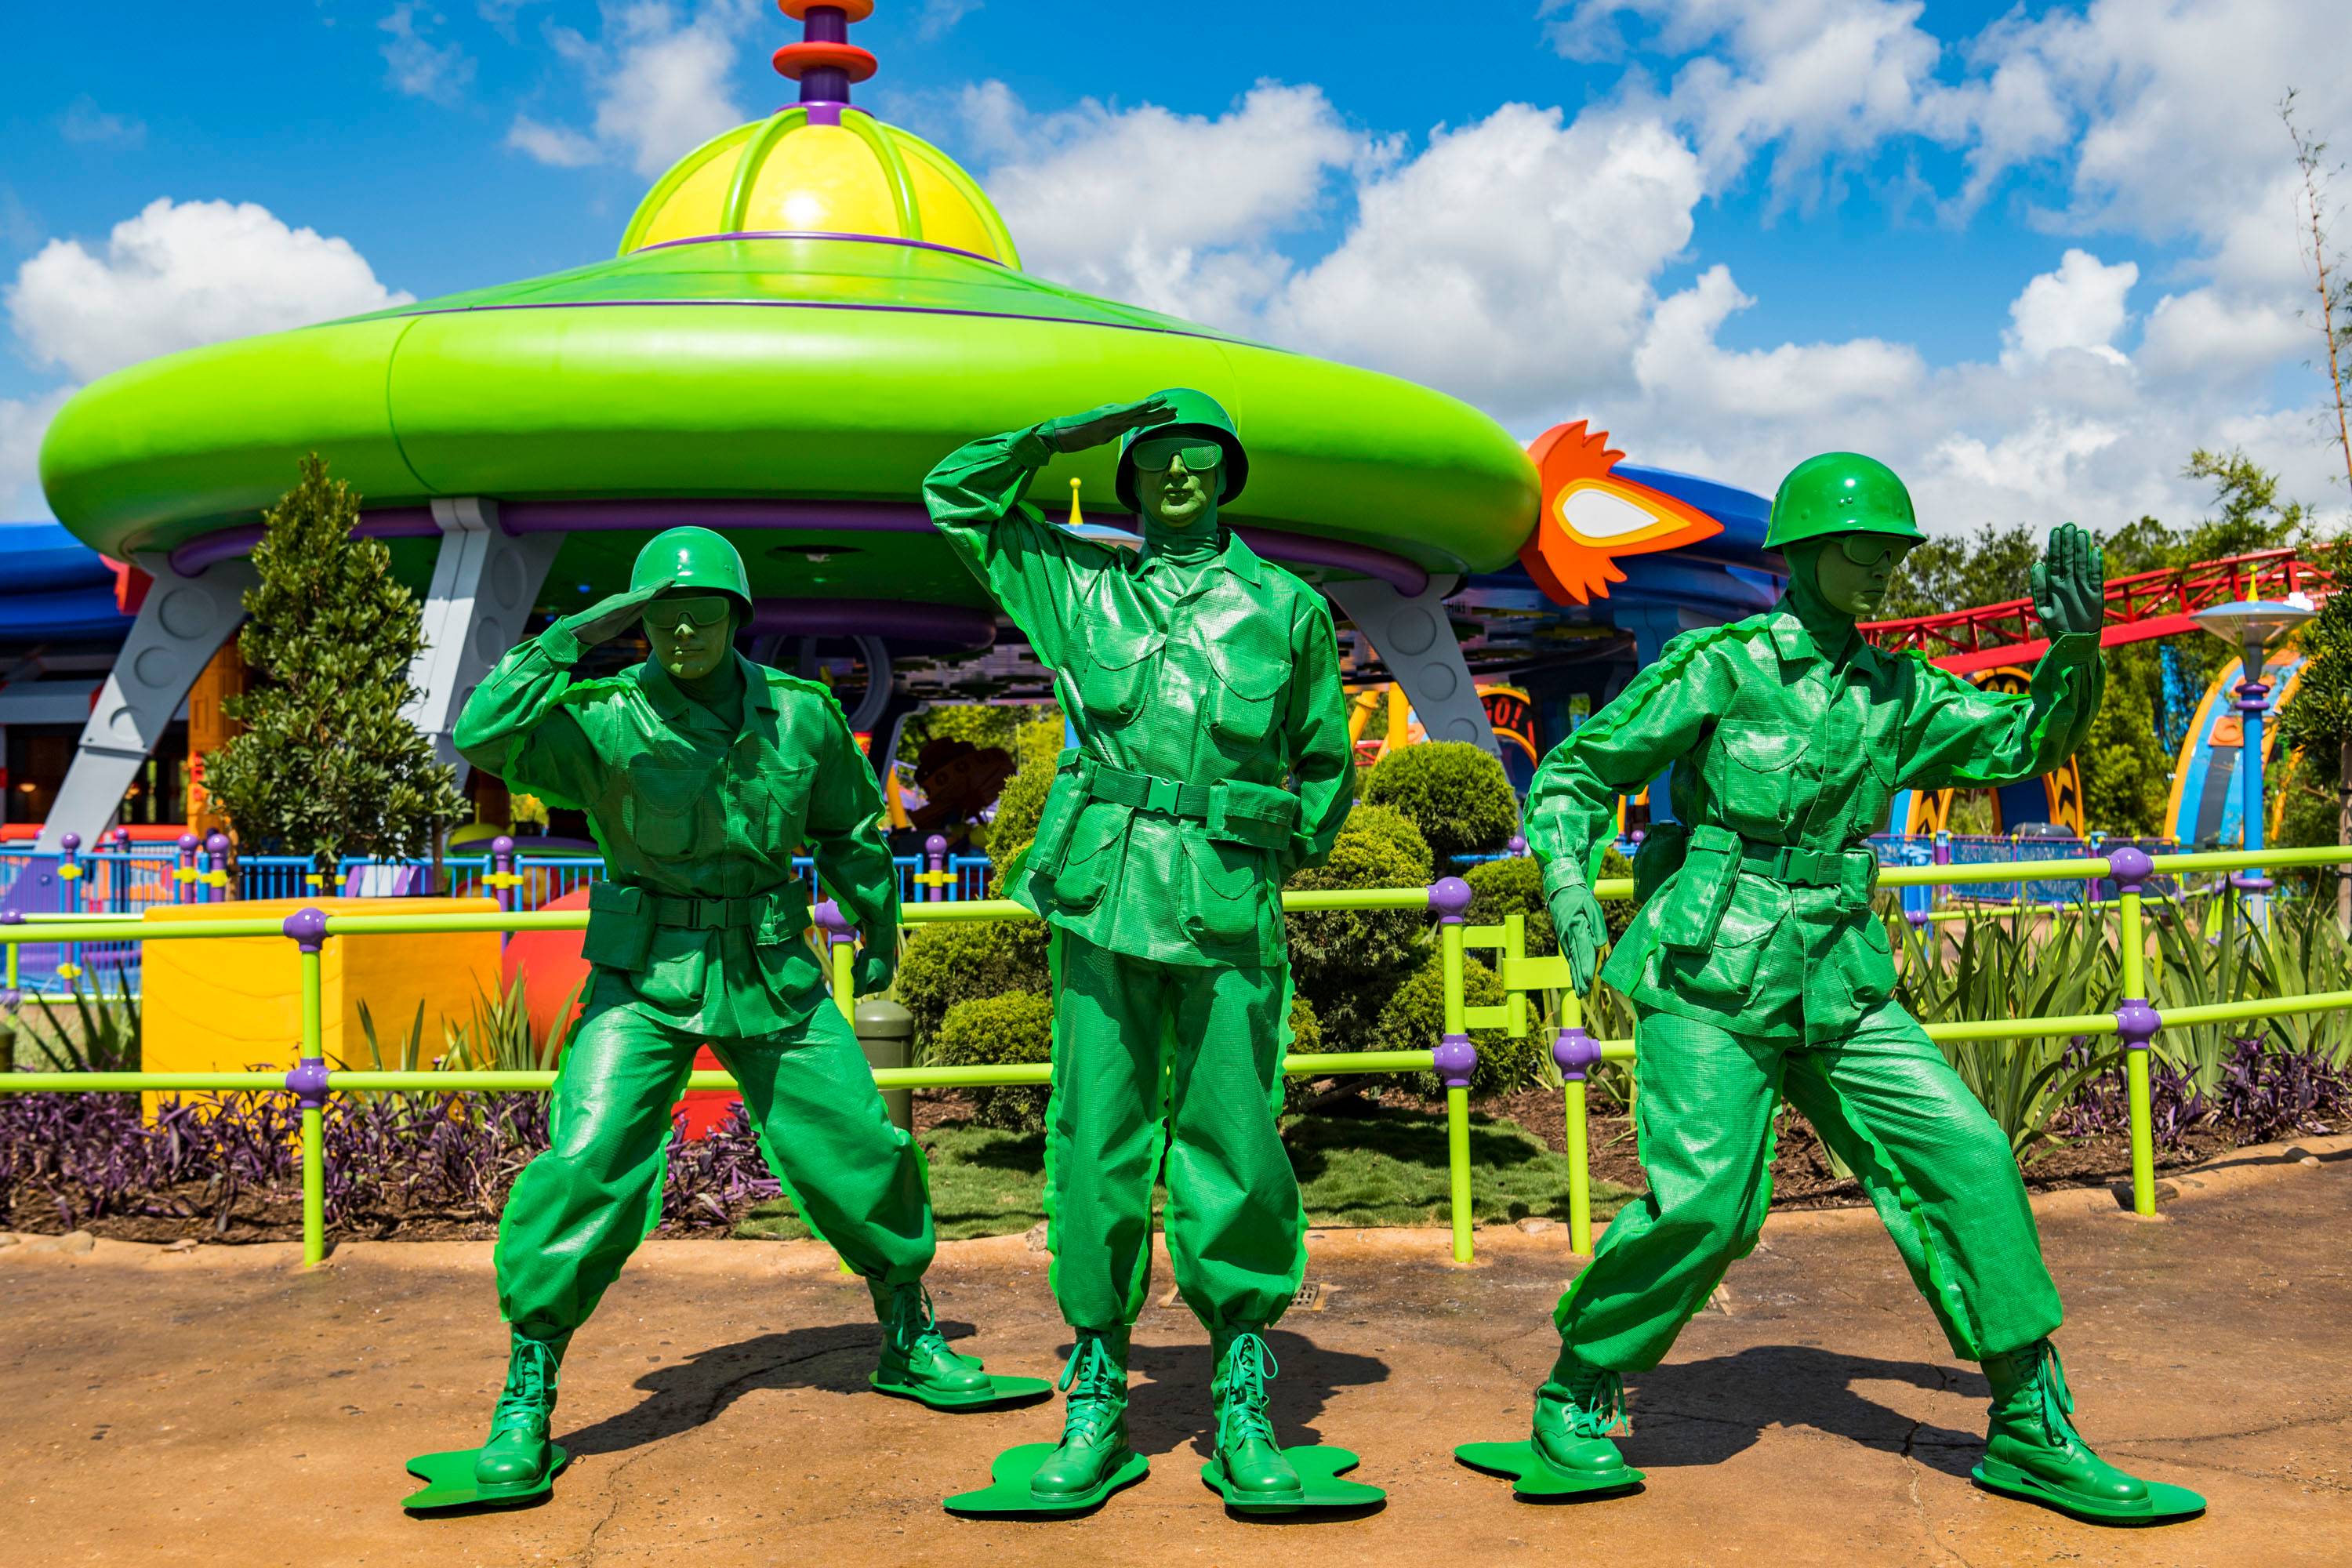 Green Army Men march through the land several times a day and stop to play Sarge Says with guests